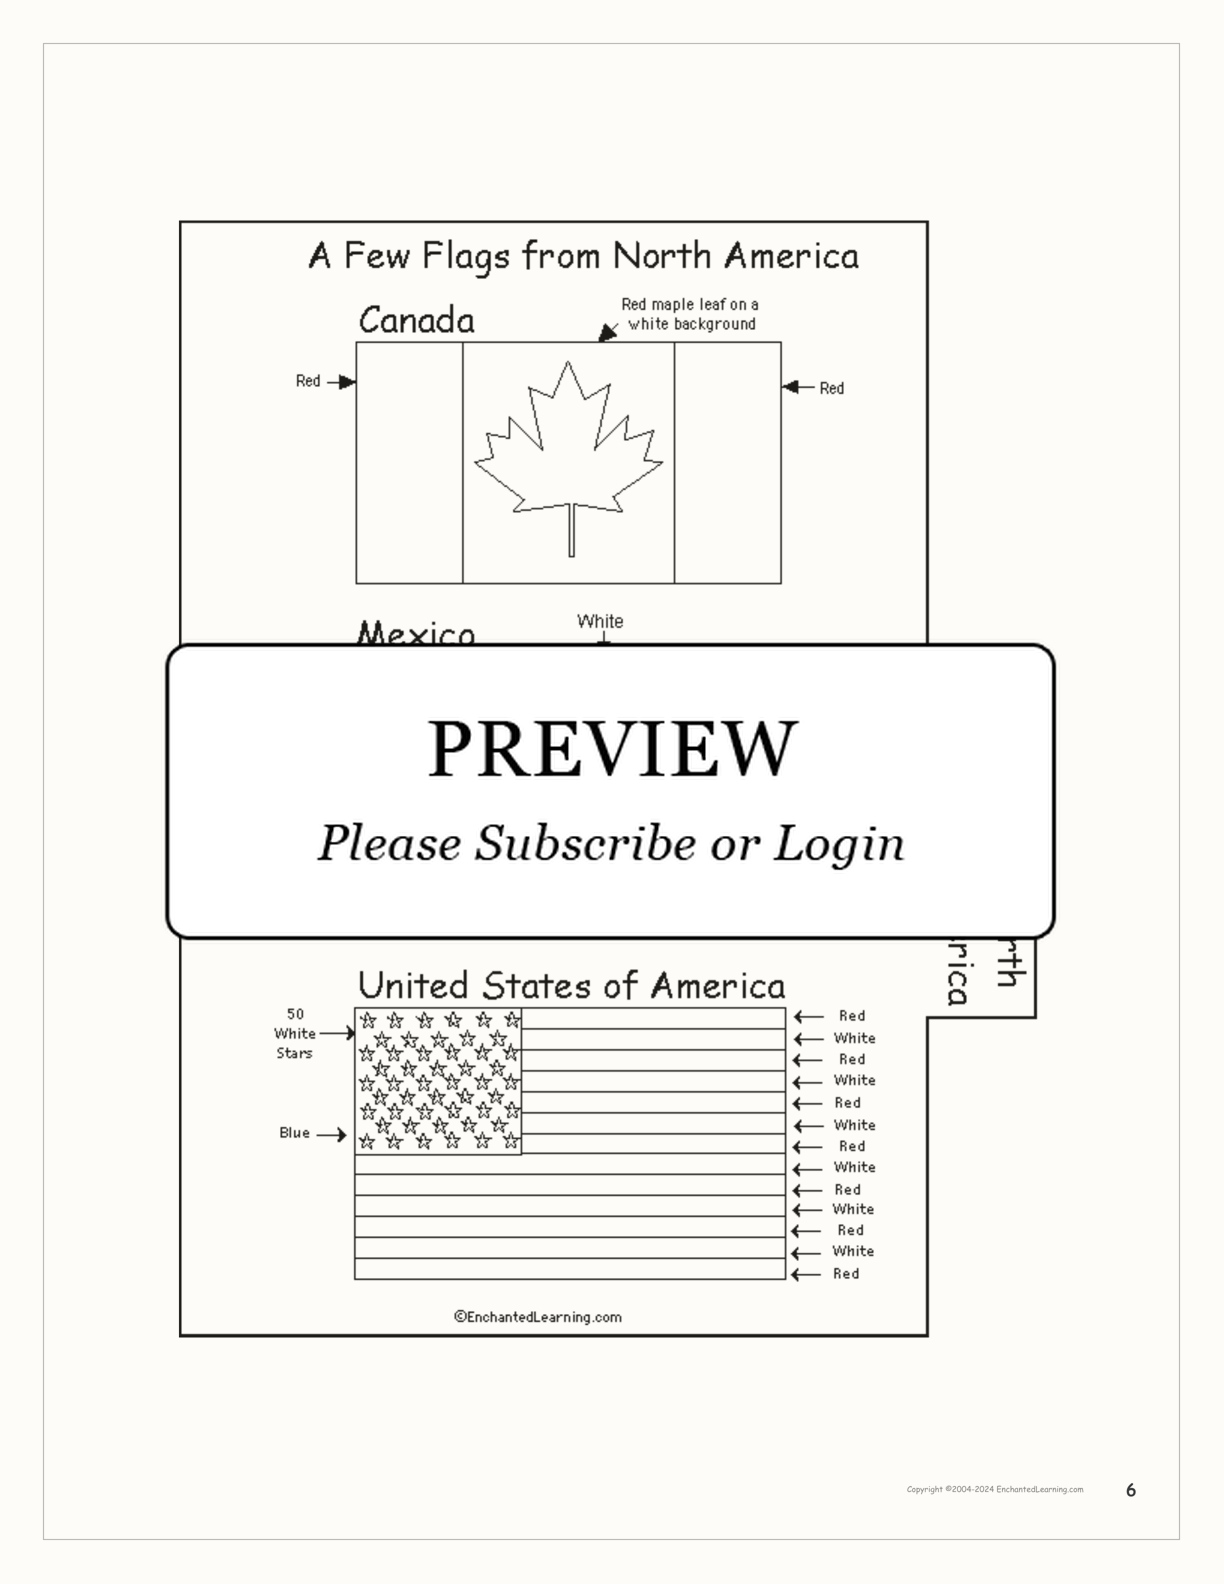 World Flags Book interactive printout page 6